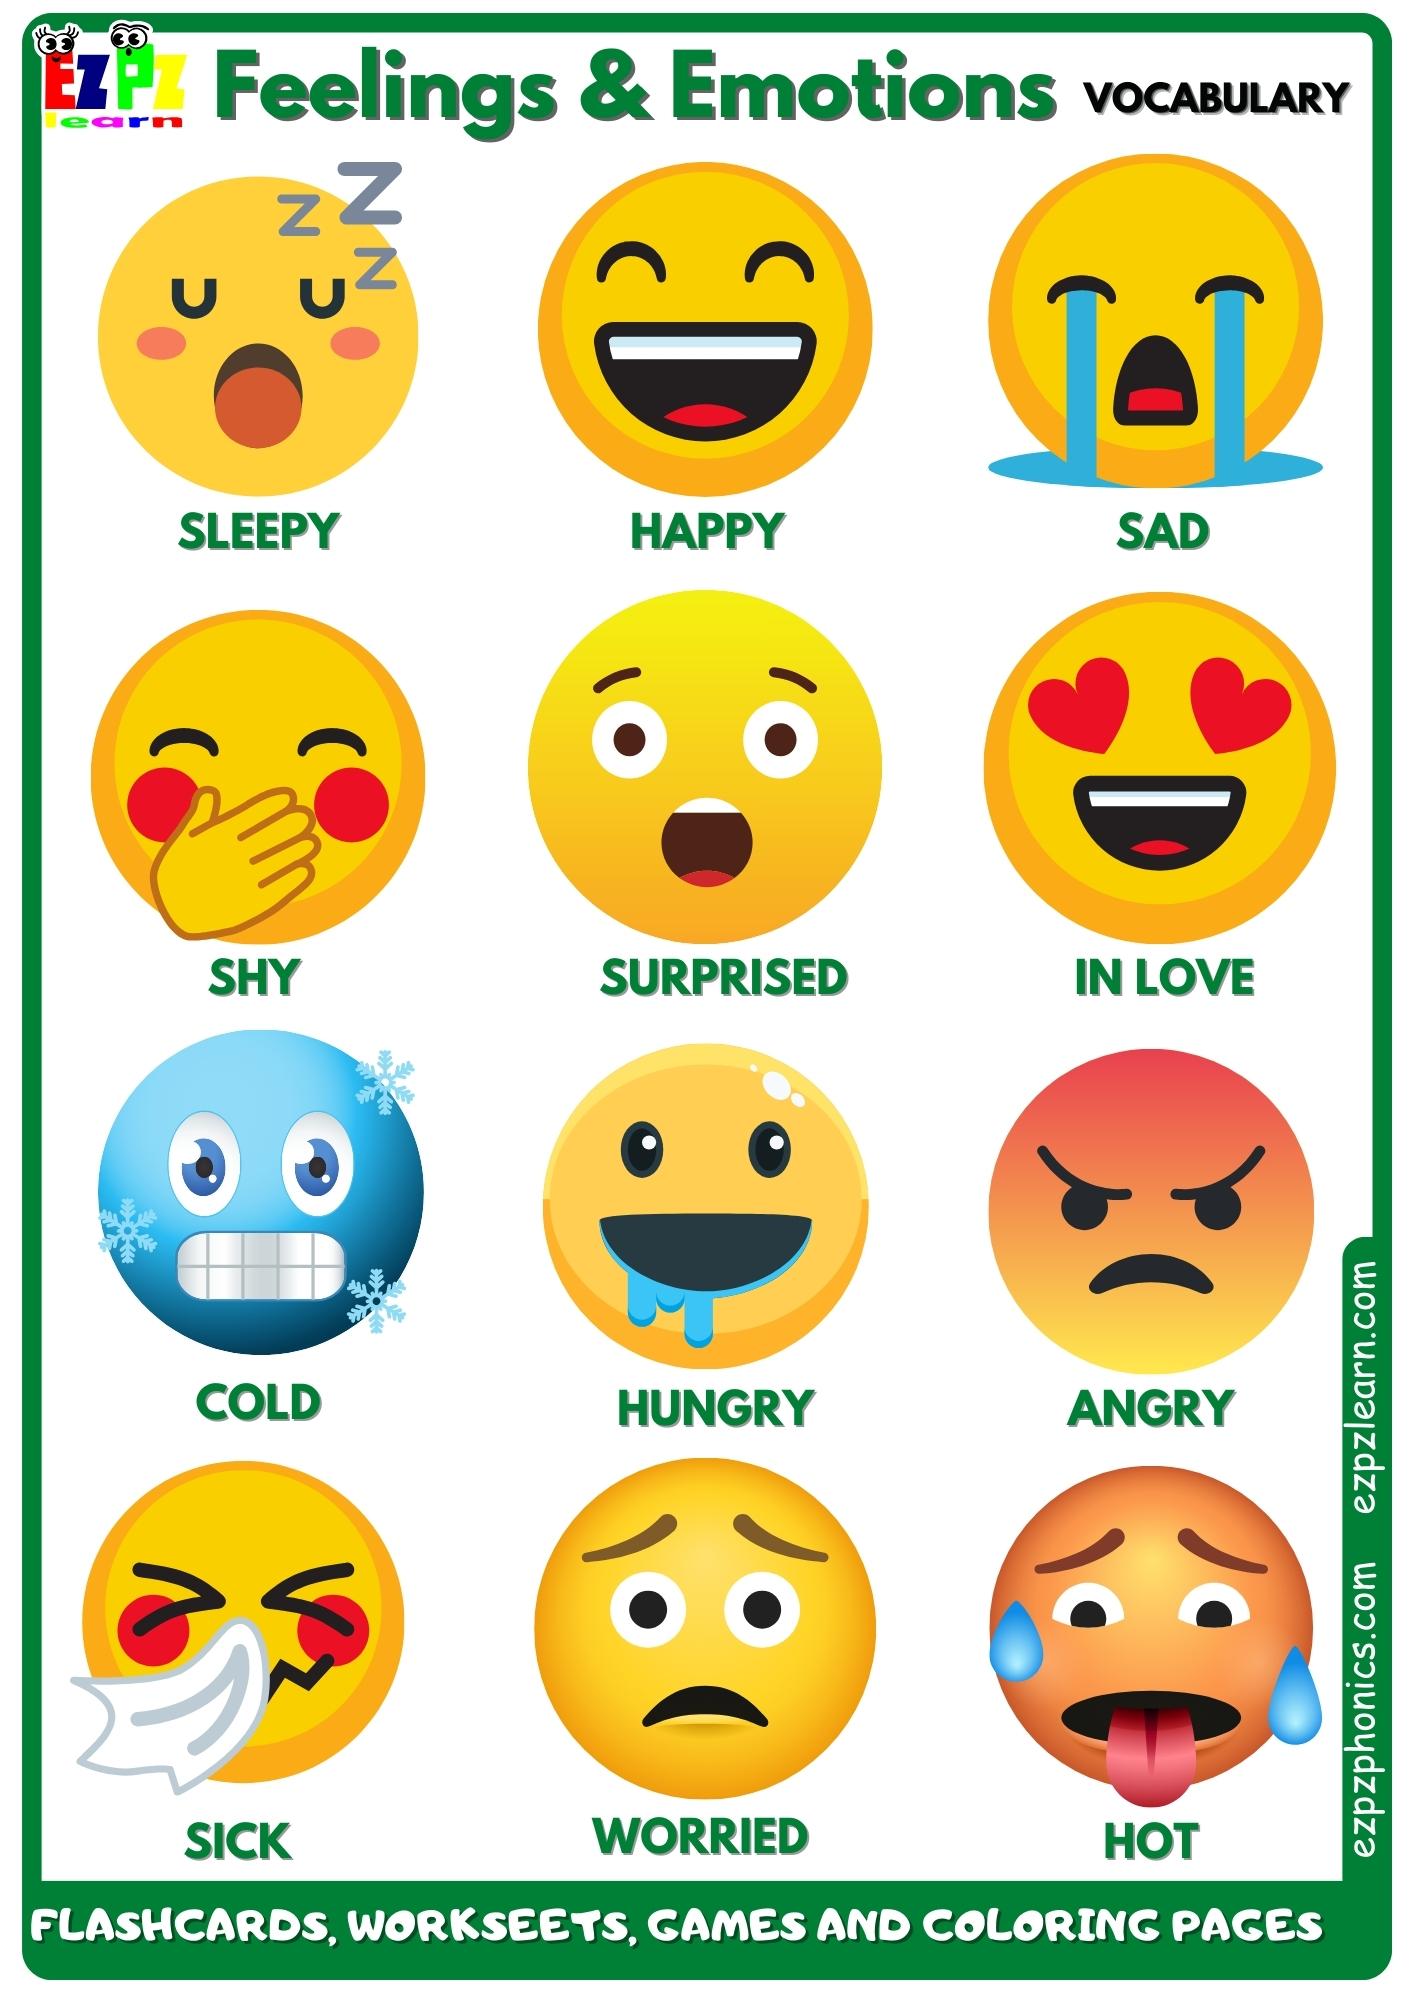 Feelings and Emotions Vocabulary Free English Vocabulary Resources ...